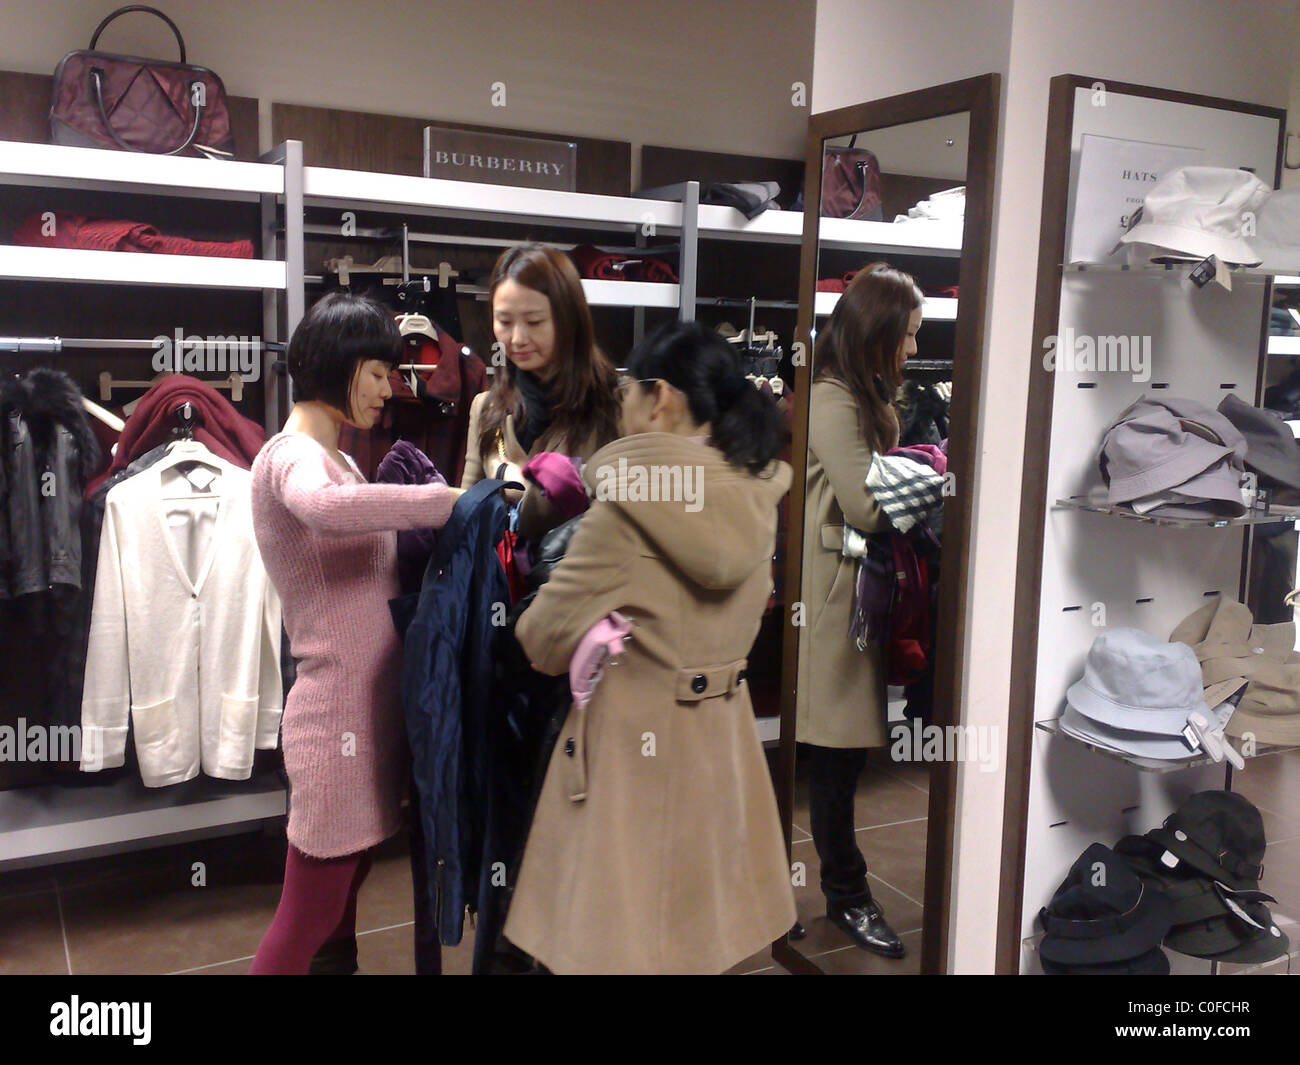 UK. CHINESE SHOPPERS AT BURBERRY OUTLET DISCOUNT STORE IN HACKNEY Stock Photo: 34759923 - Alamy